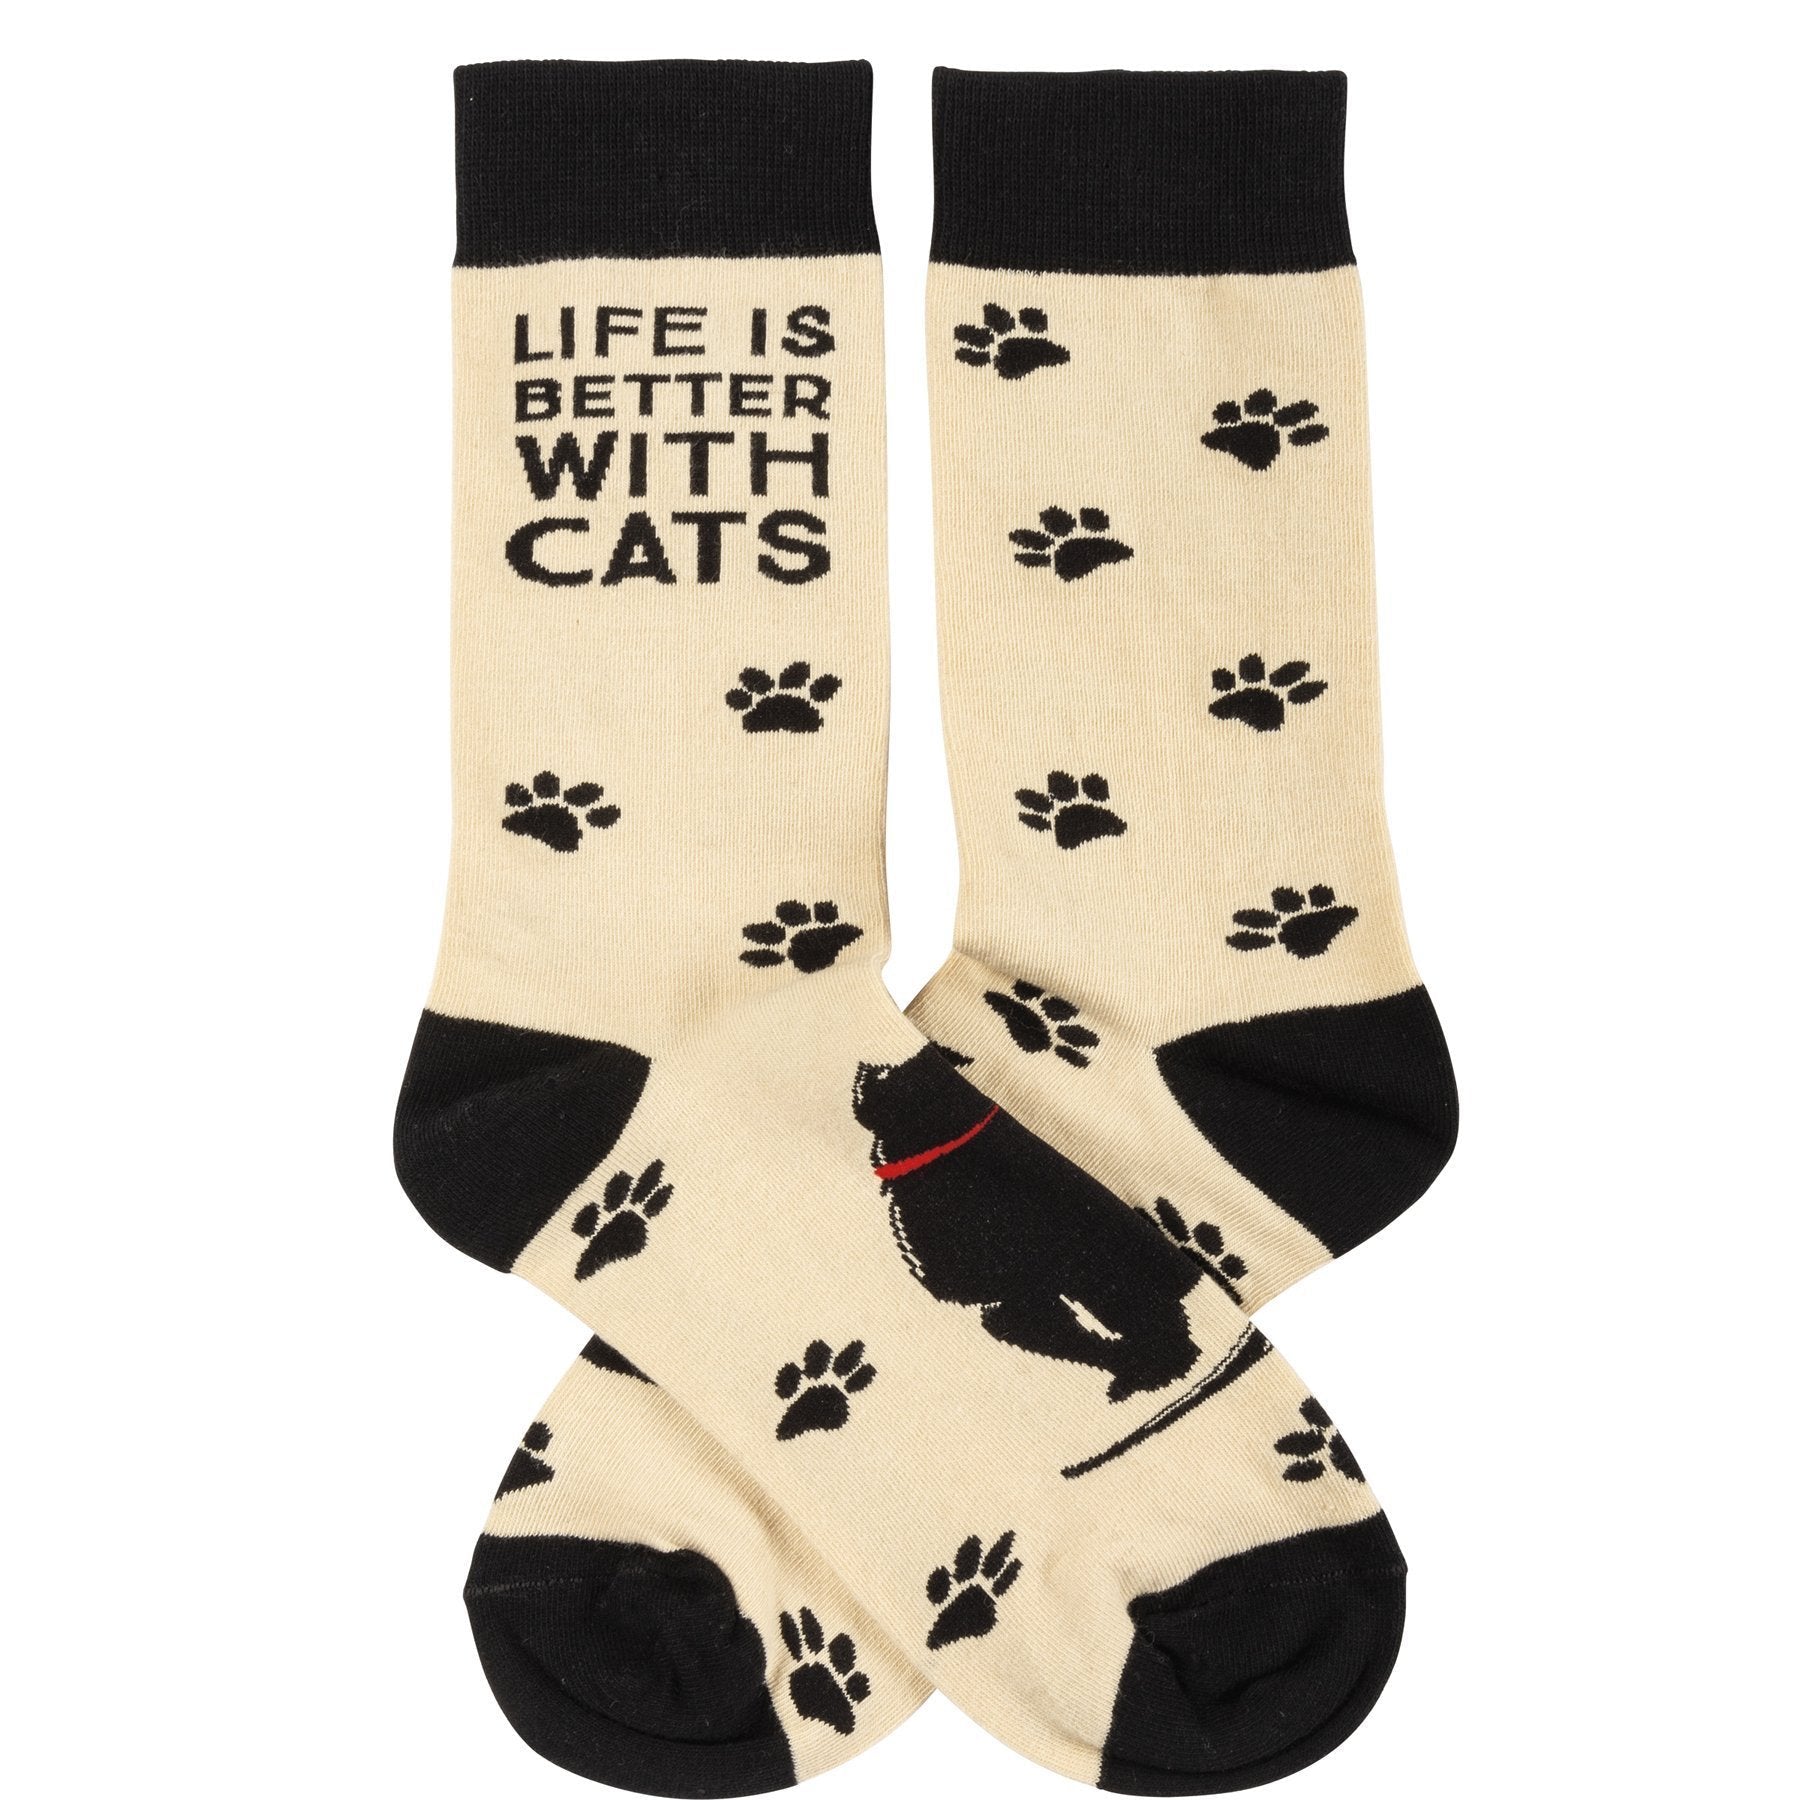 Black Cat Socks Featuring The Words Life Is Better With Cats